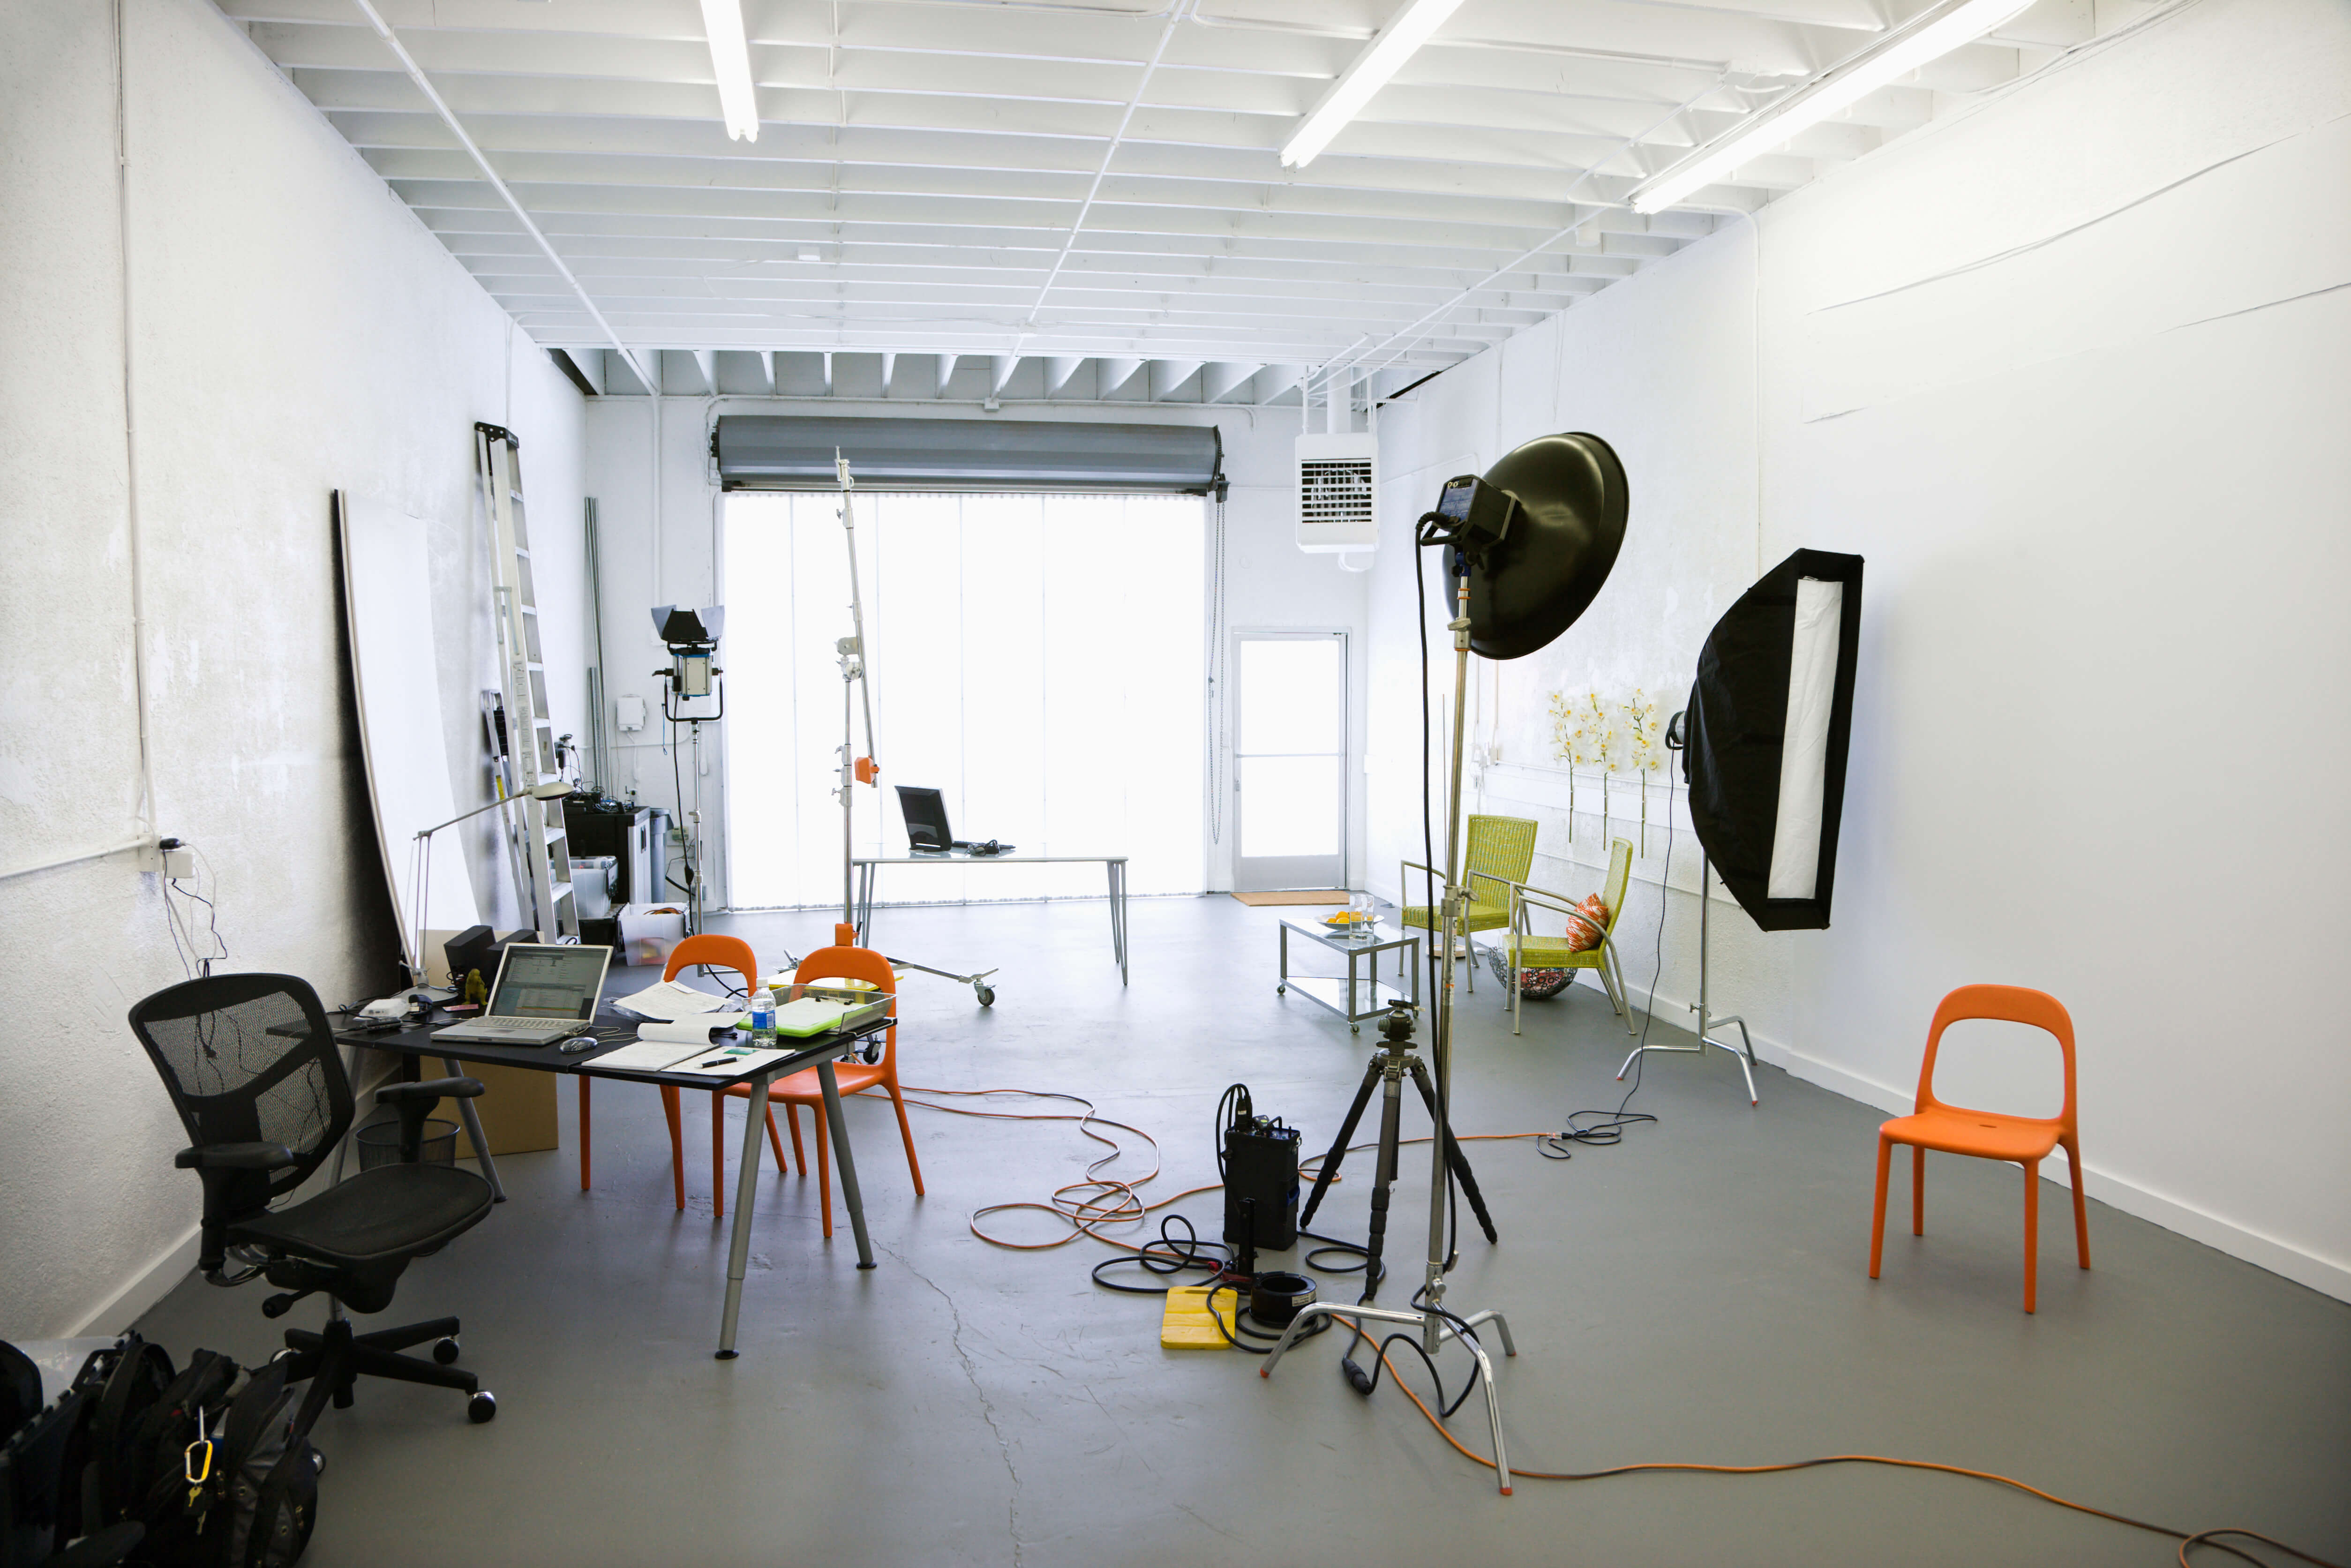 An all-white photography studio is set up with photography equipment, a small work area with a desk, chair, and laptop, photo space, and a large floor-to-ceiling opening letting in natural light.